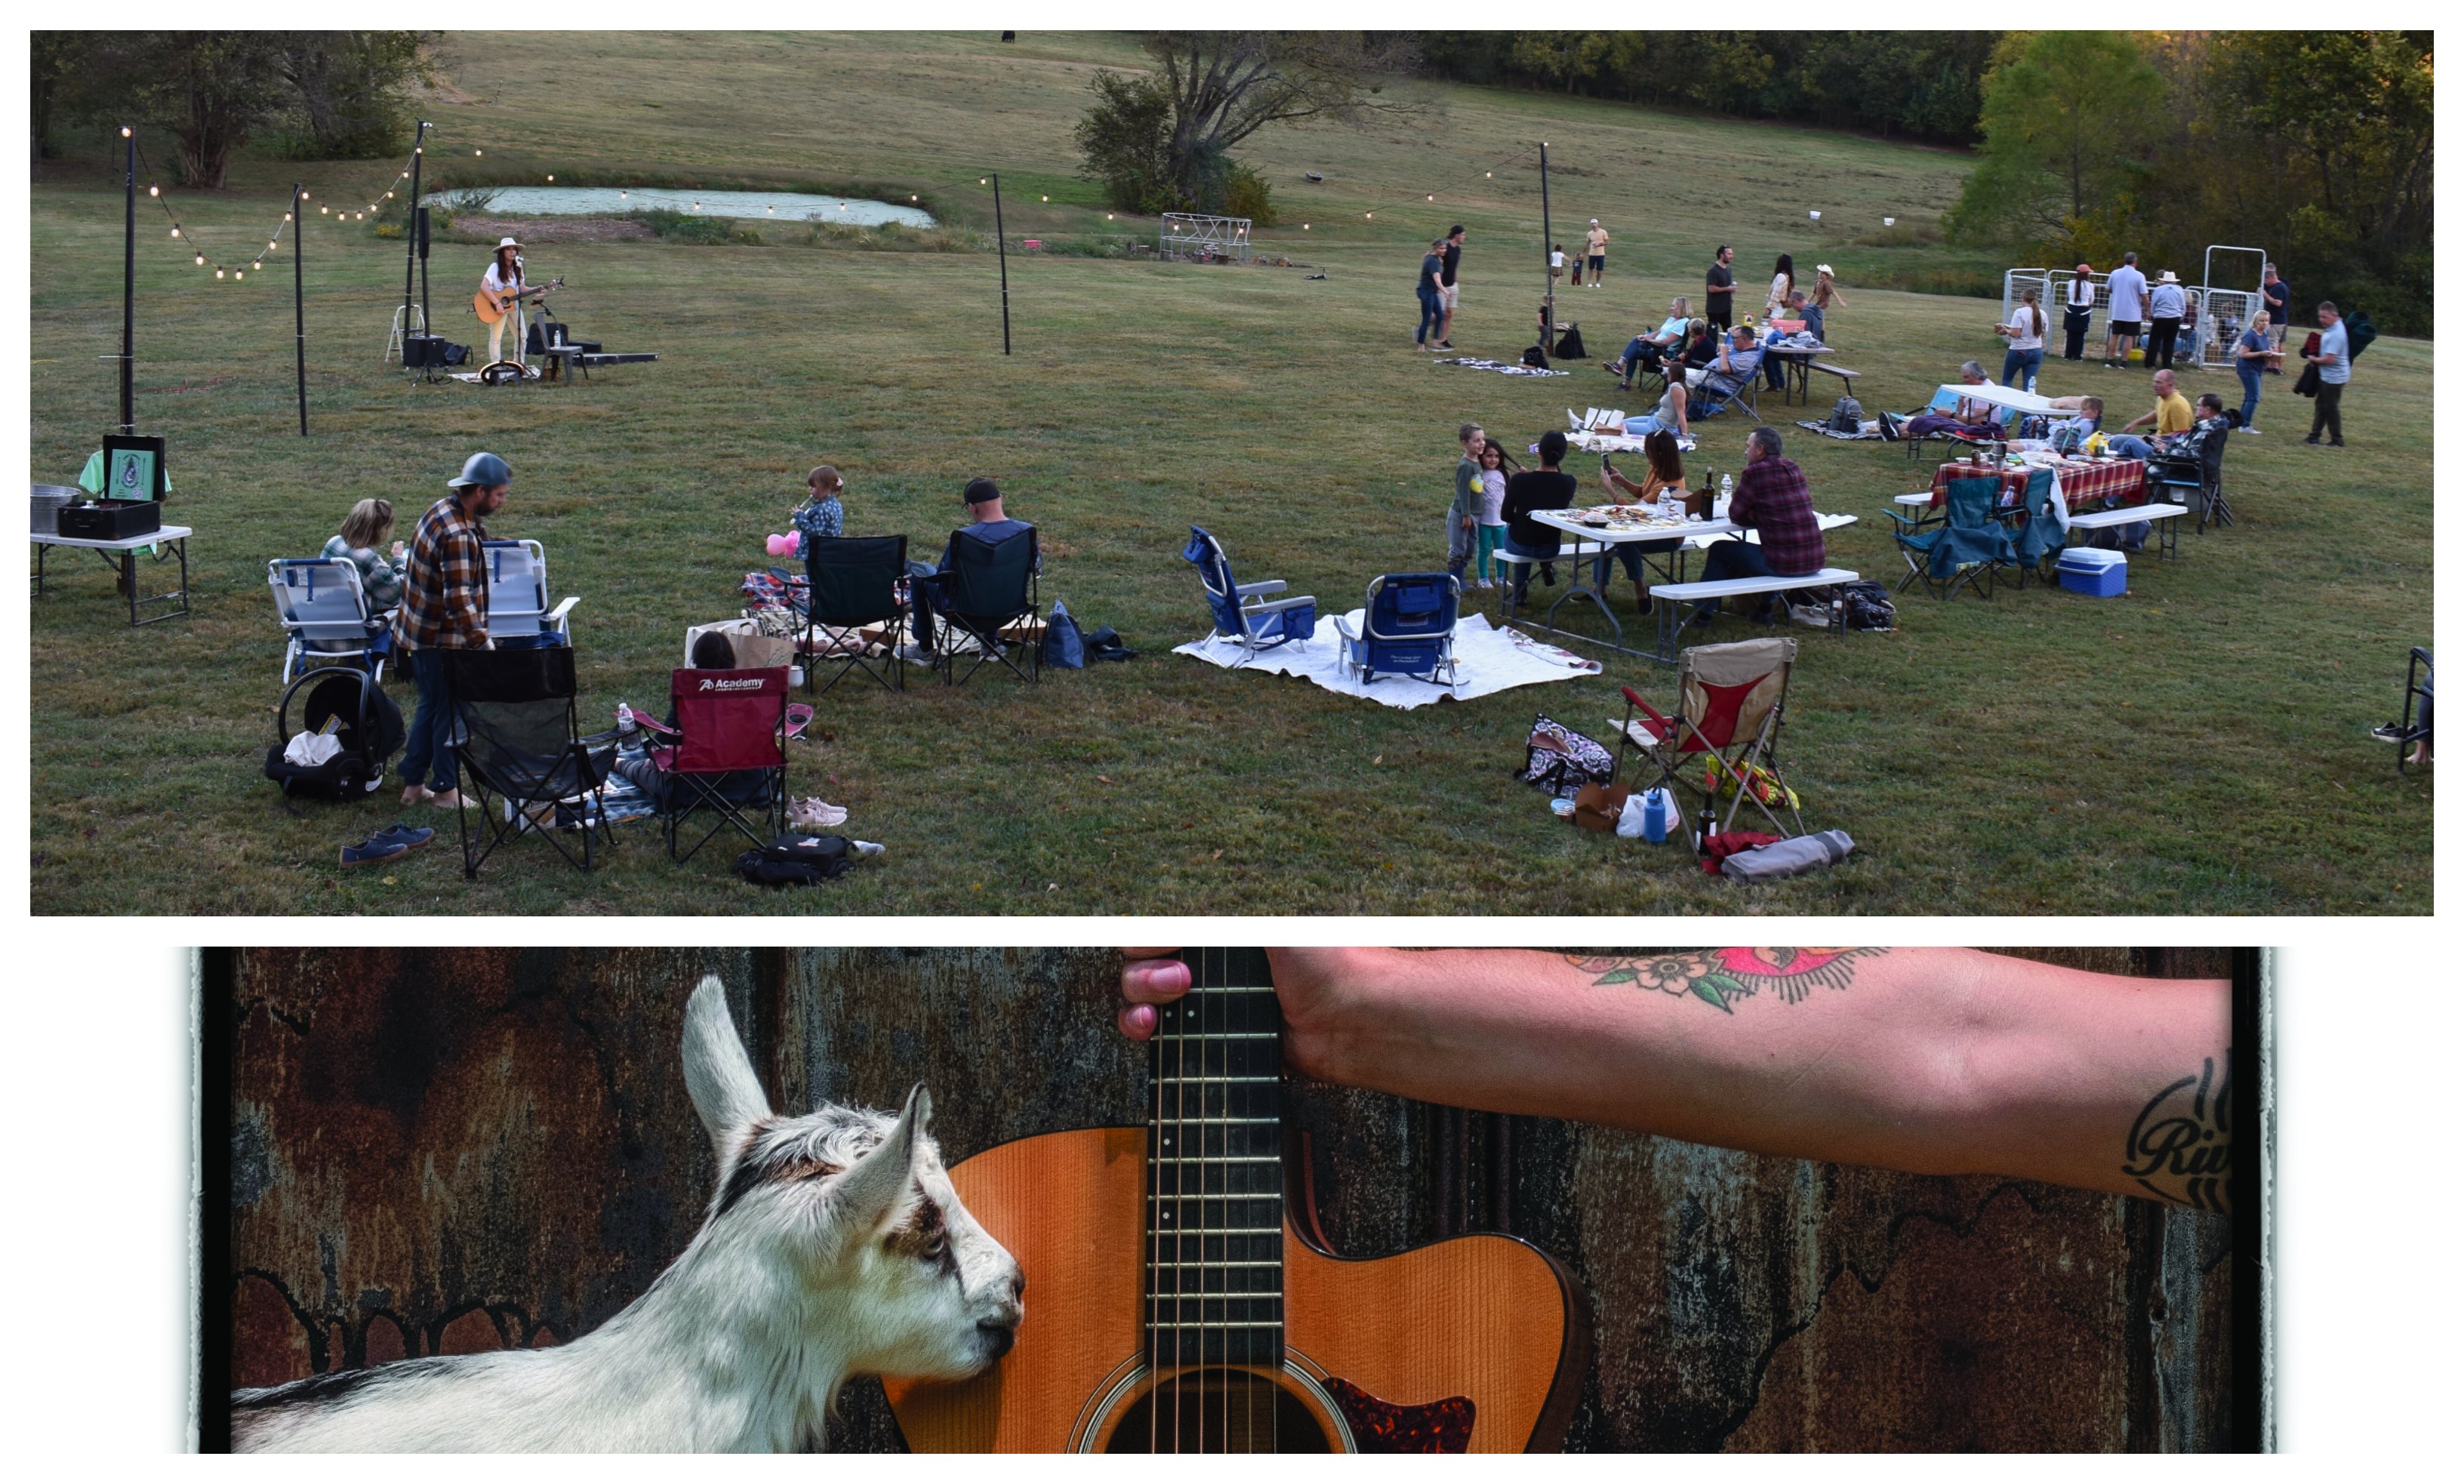 The Goats and Guitars event